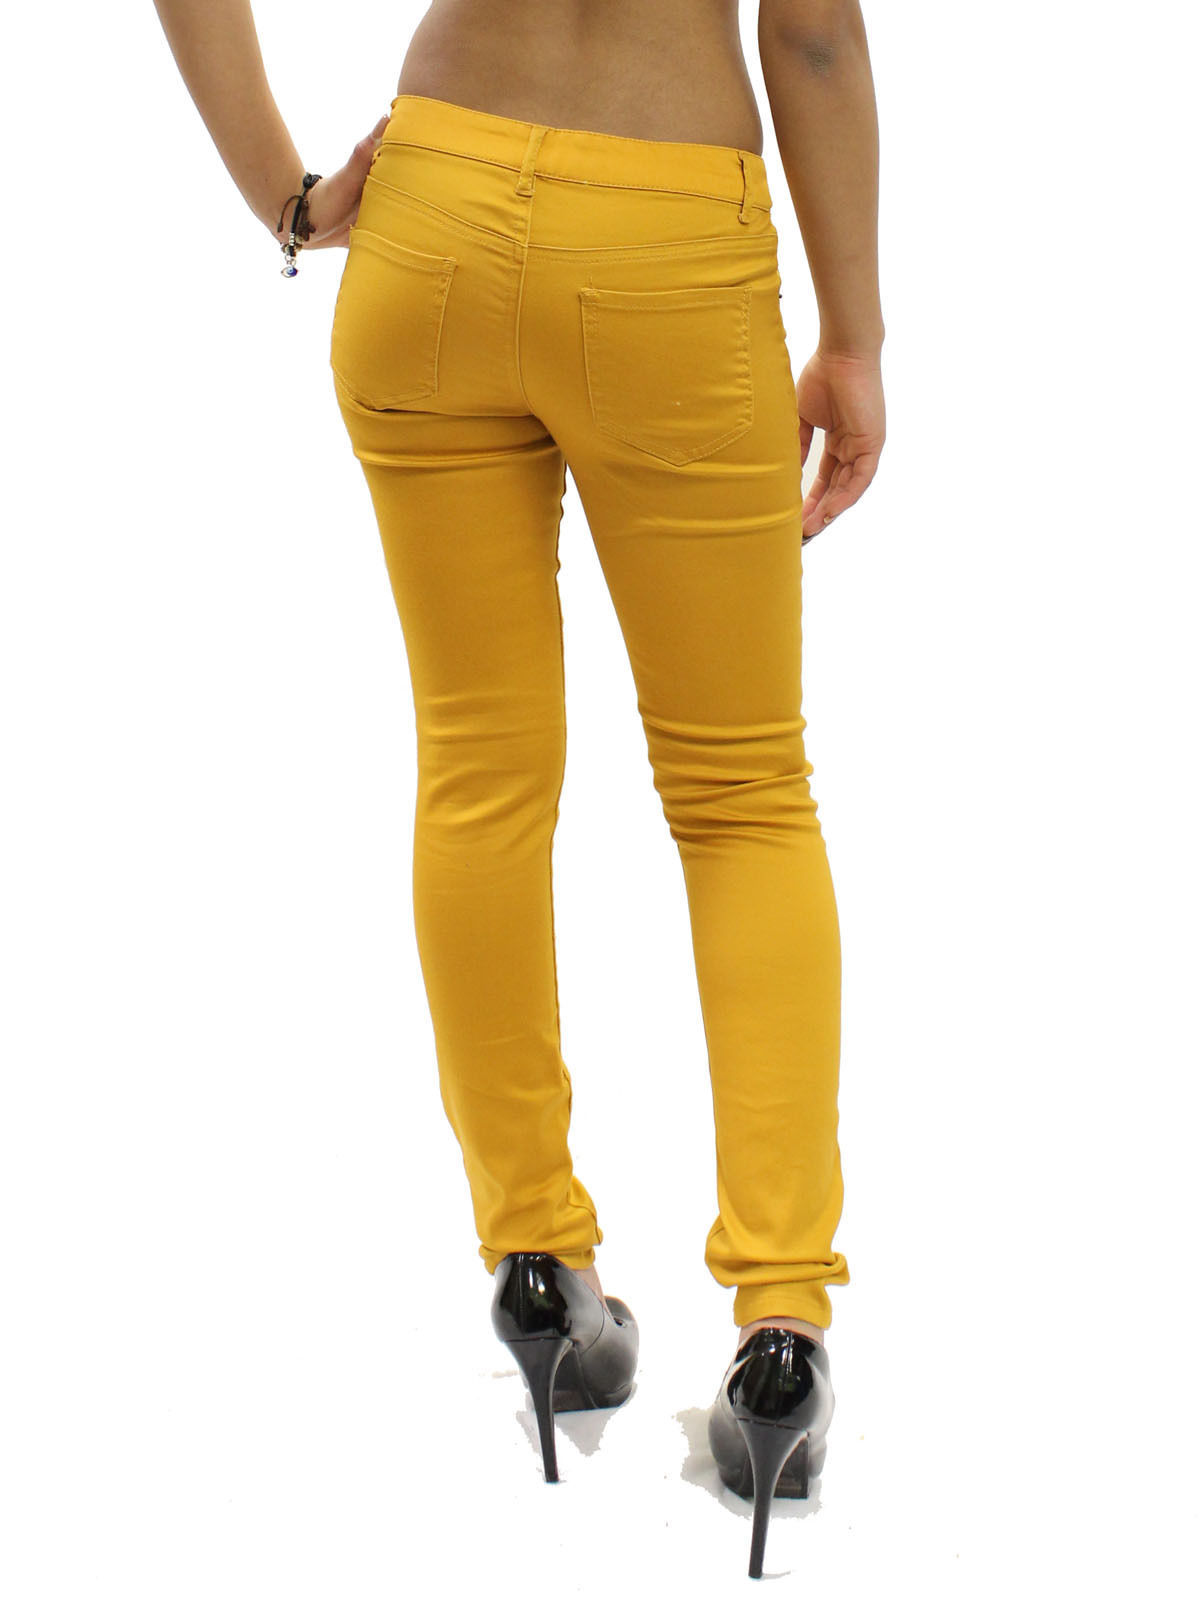 New Mustard Yellow 5 Pockets & Rivets Color Skinny Pants Junior's Size ...